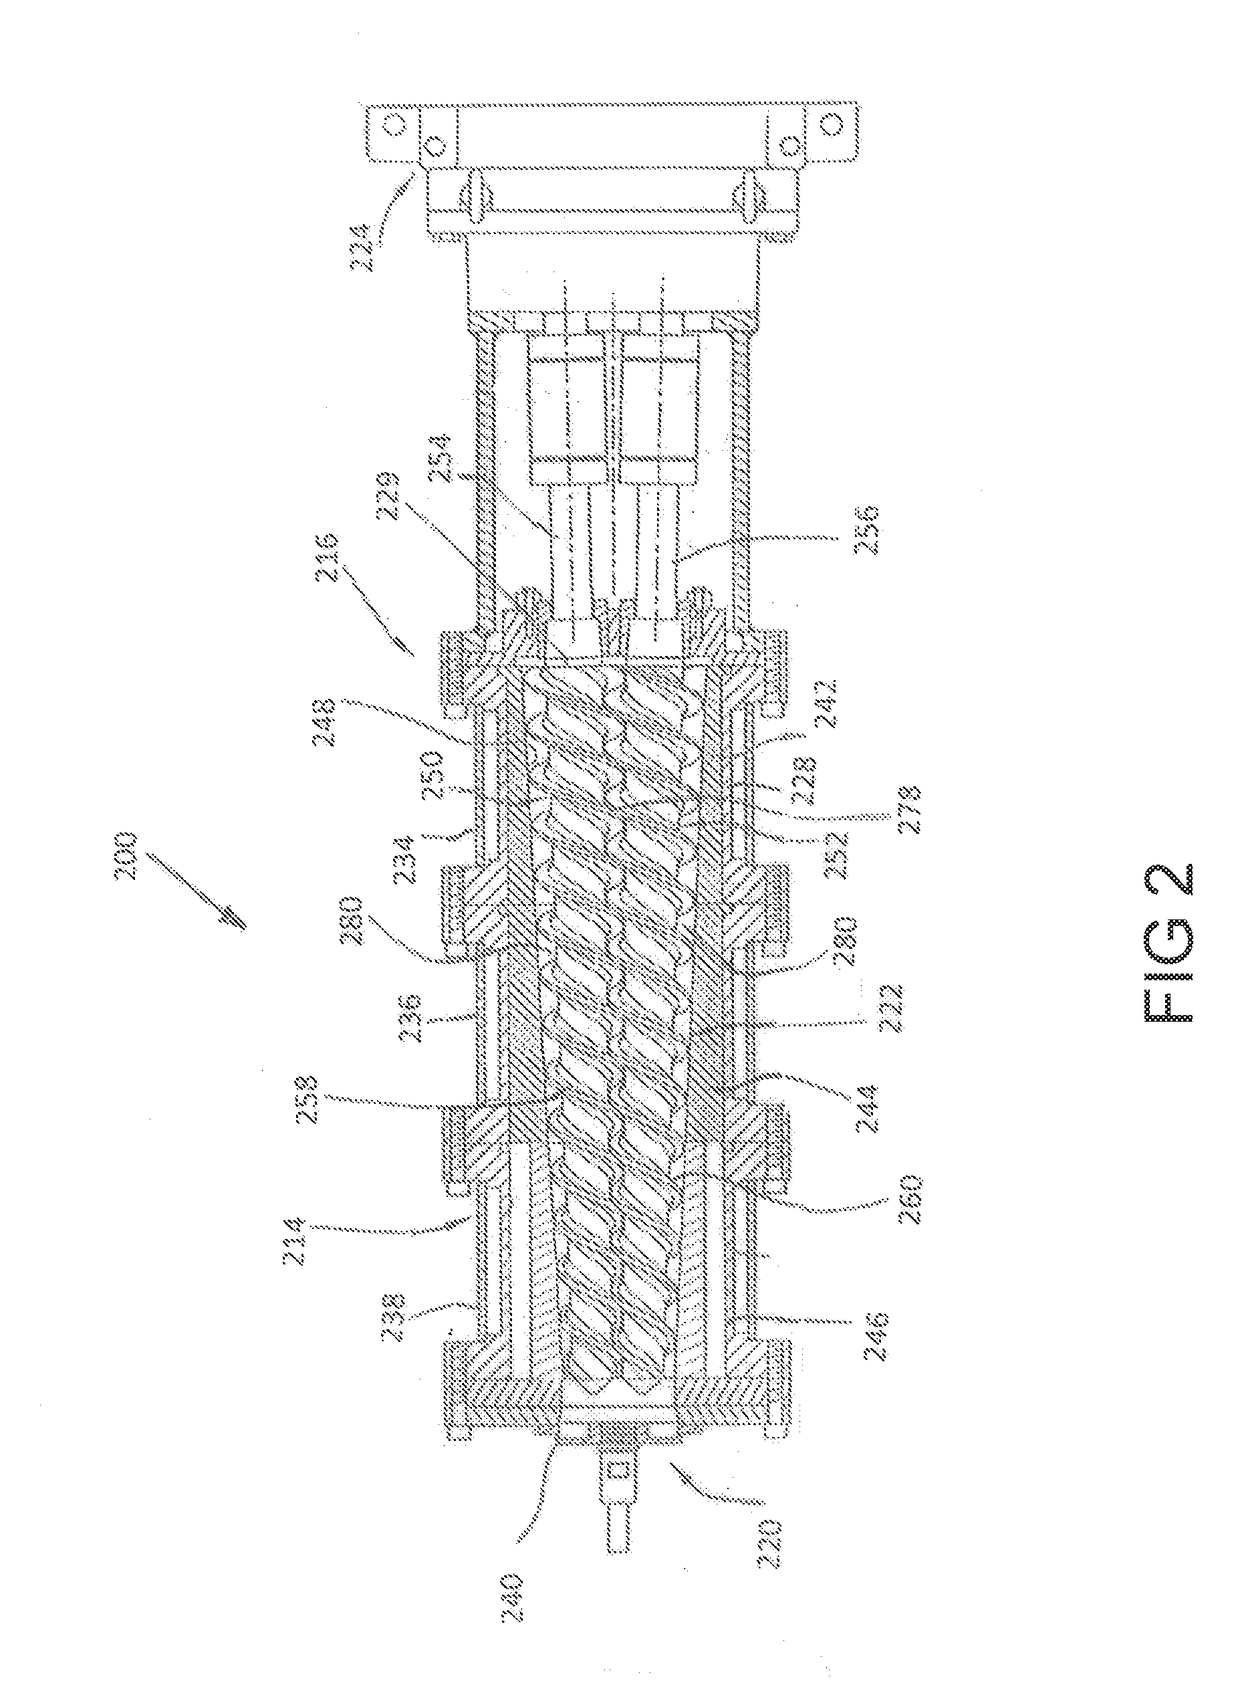 Solid/fluid separation device and method